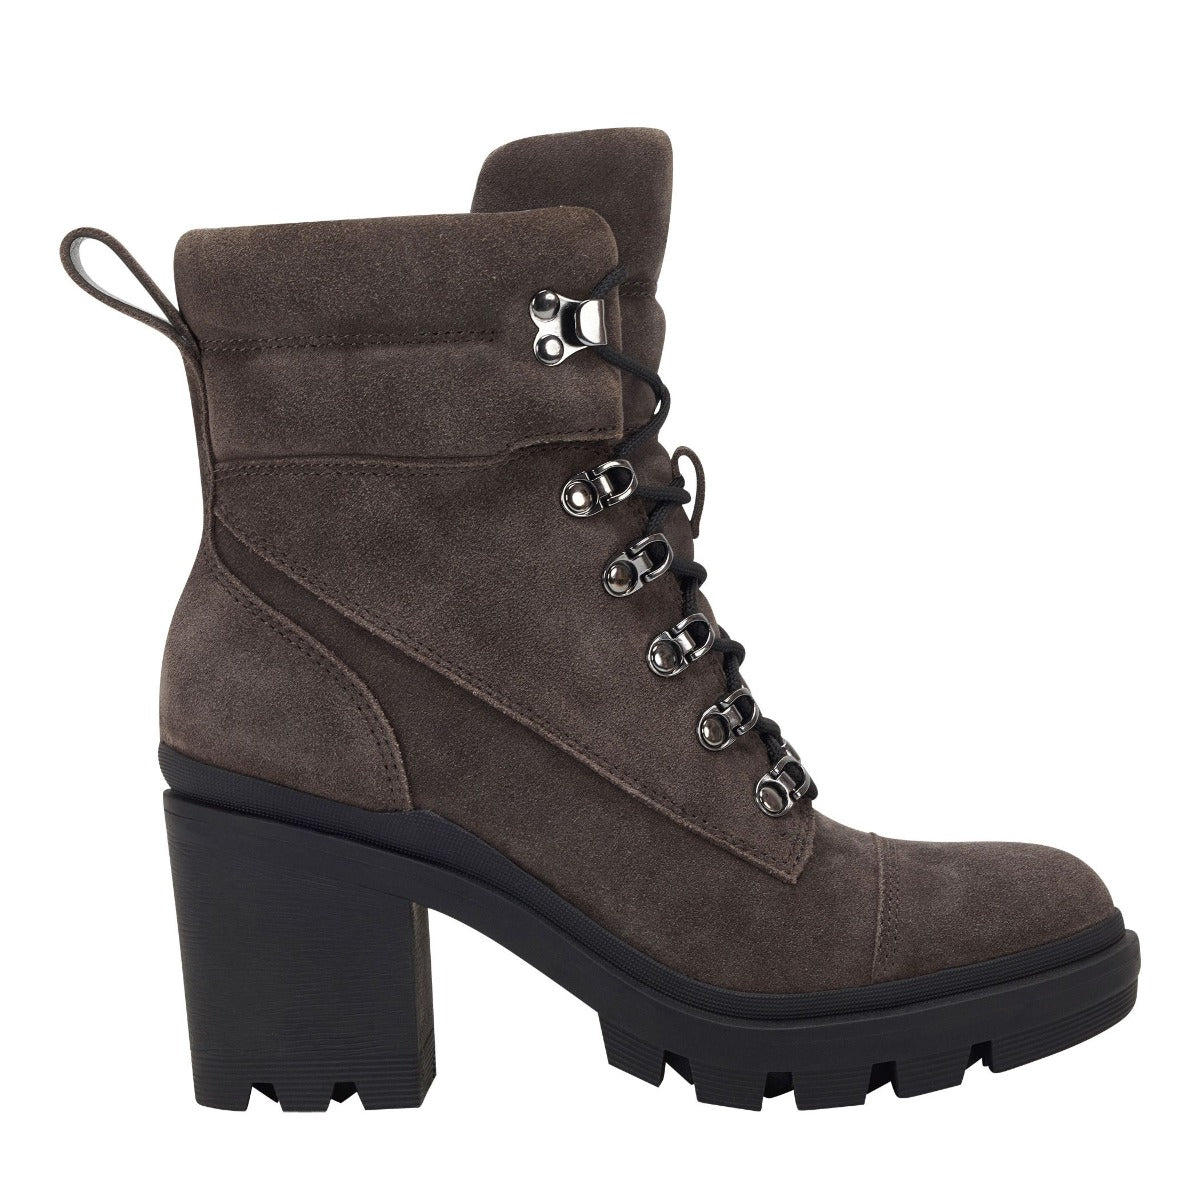 Kachine Lace-Up Bootie - Marc Fisher 